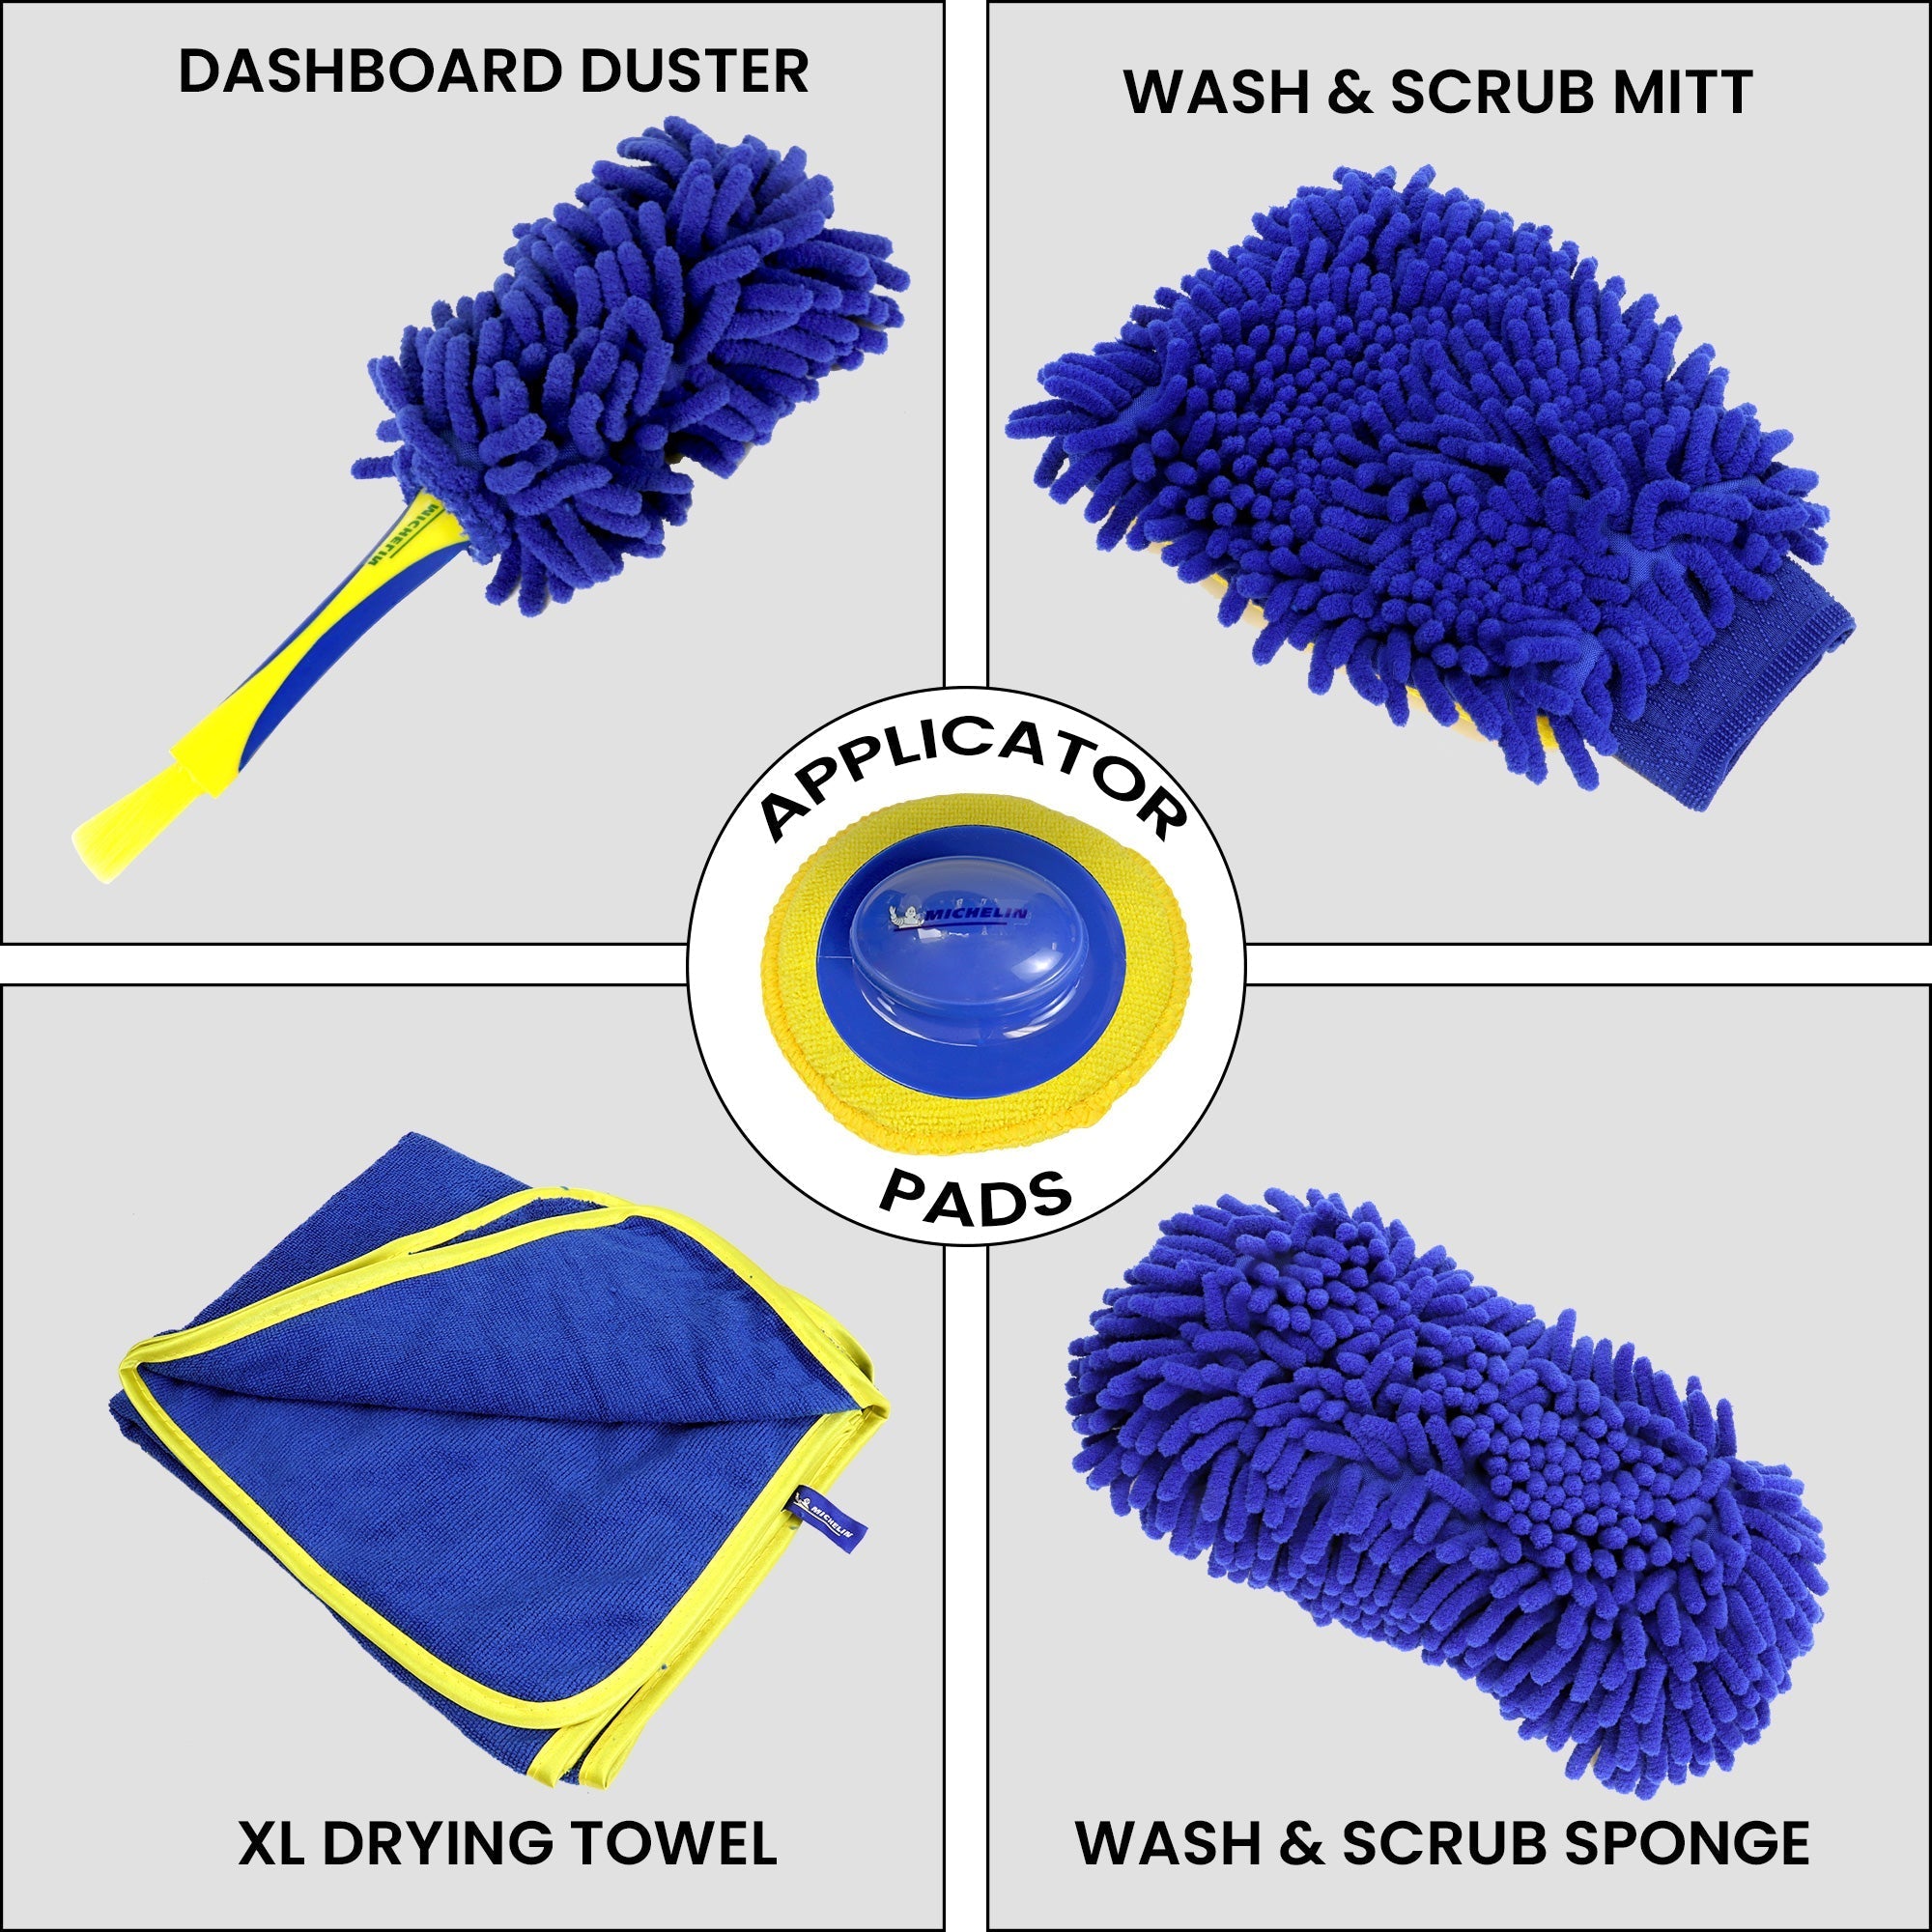 Product shot of one microfiber applicator pad with detachable handle in the center surrounded by a grid of four product shots of components of ultimate car wash kit on light gray backgrounds, labeled: Dashboard duster; wash and scrub mitt; wash and scrub sponge; XL drying towel